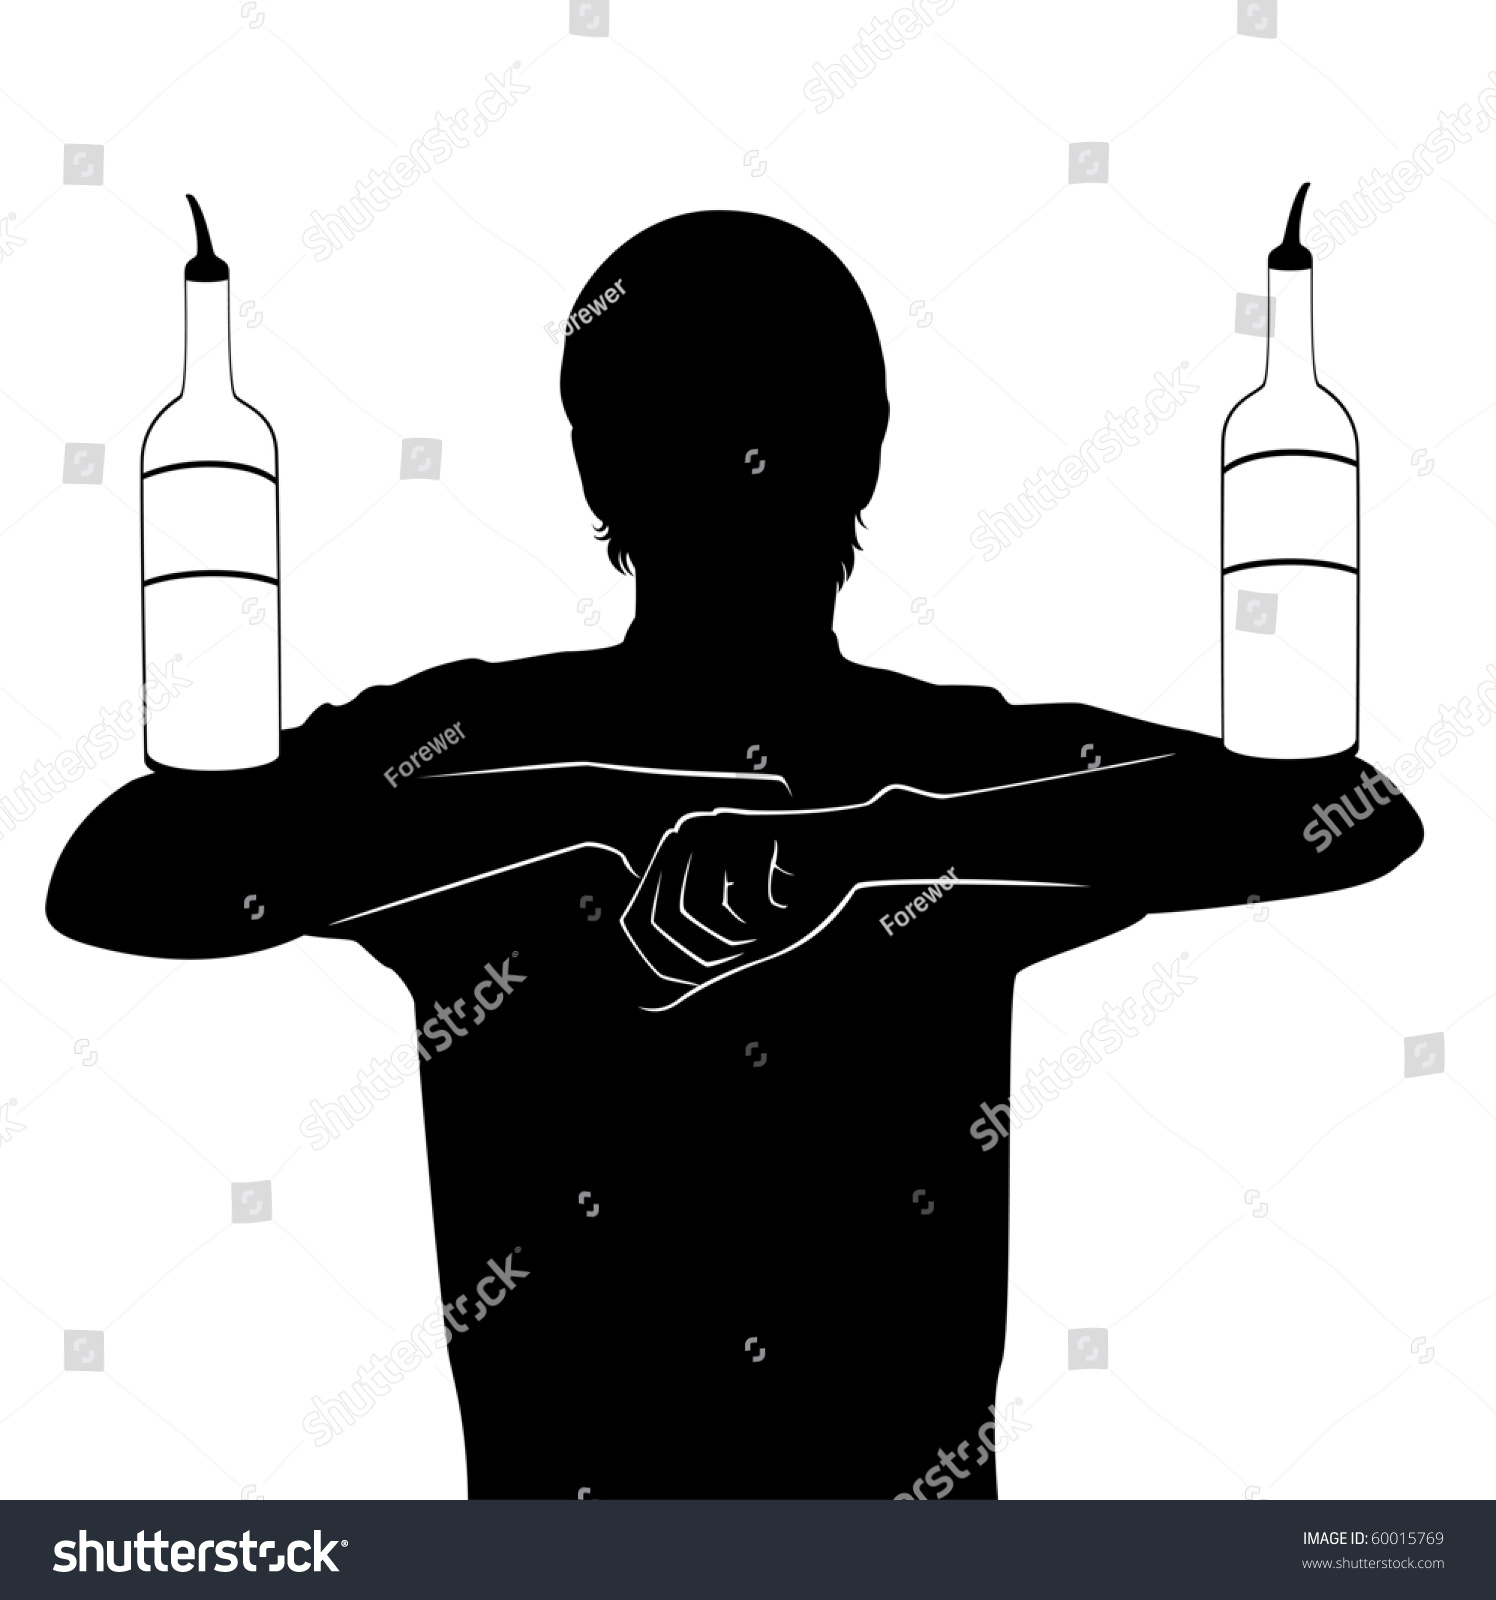 Vector Silhouette Of Barman Showing Tricks With A Bottle Shutterstock